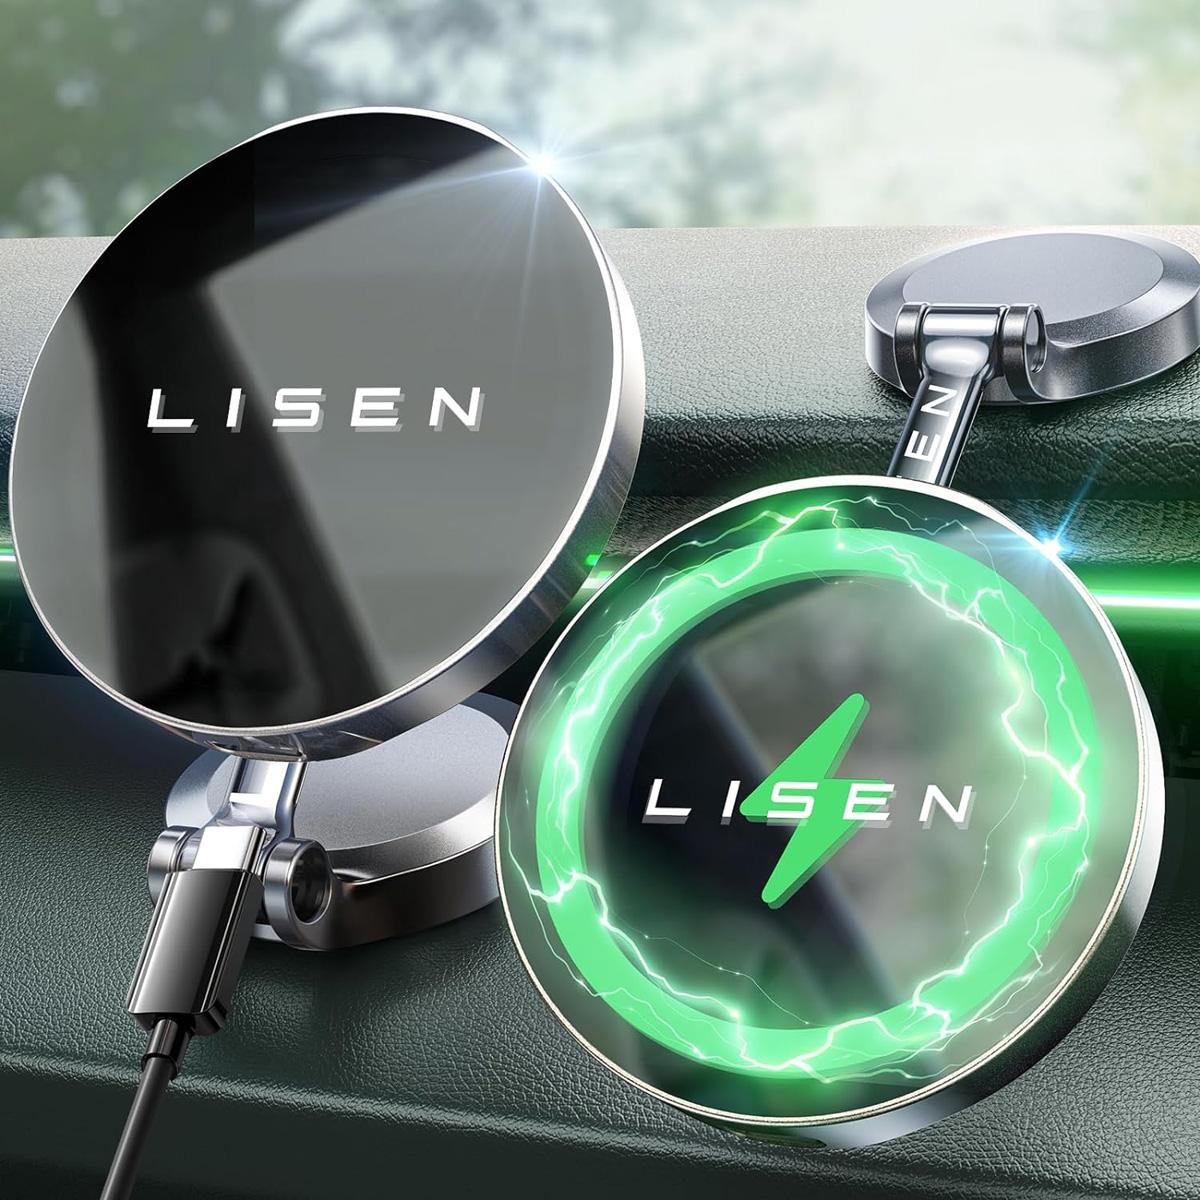 Lisen iPhone Magsafe Car Mount Charger for $15.99